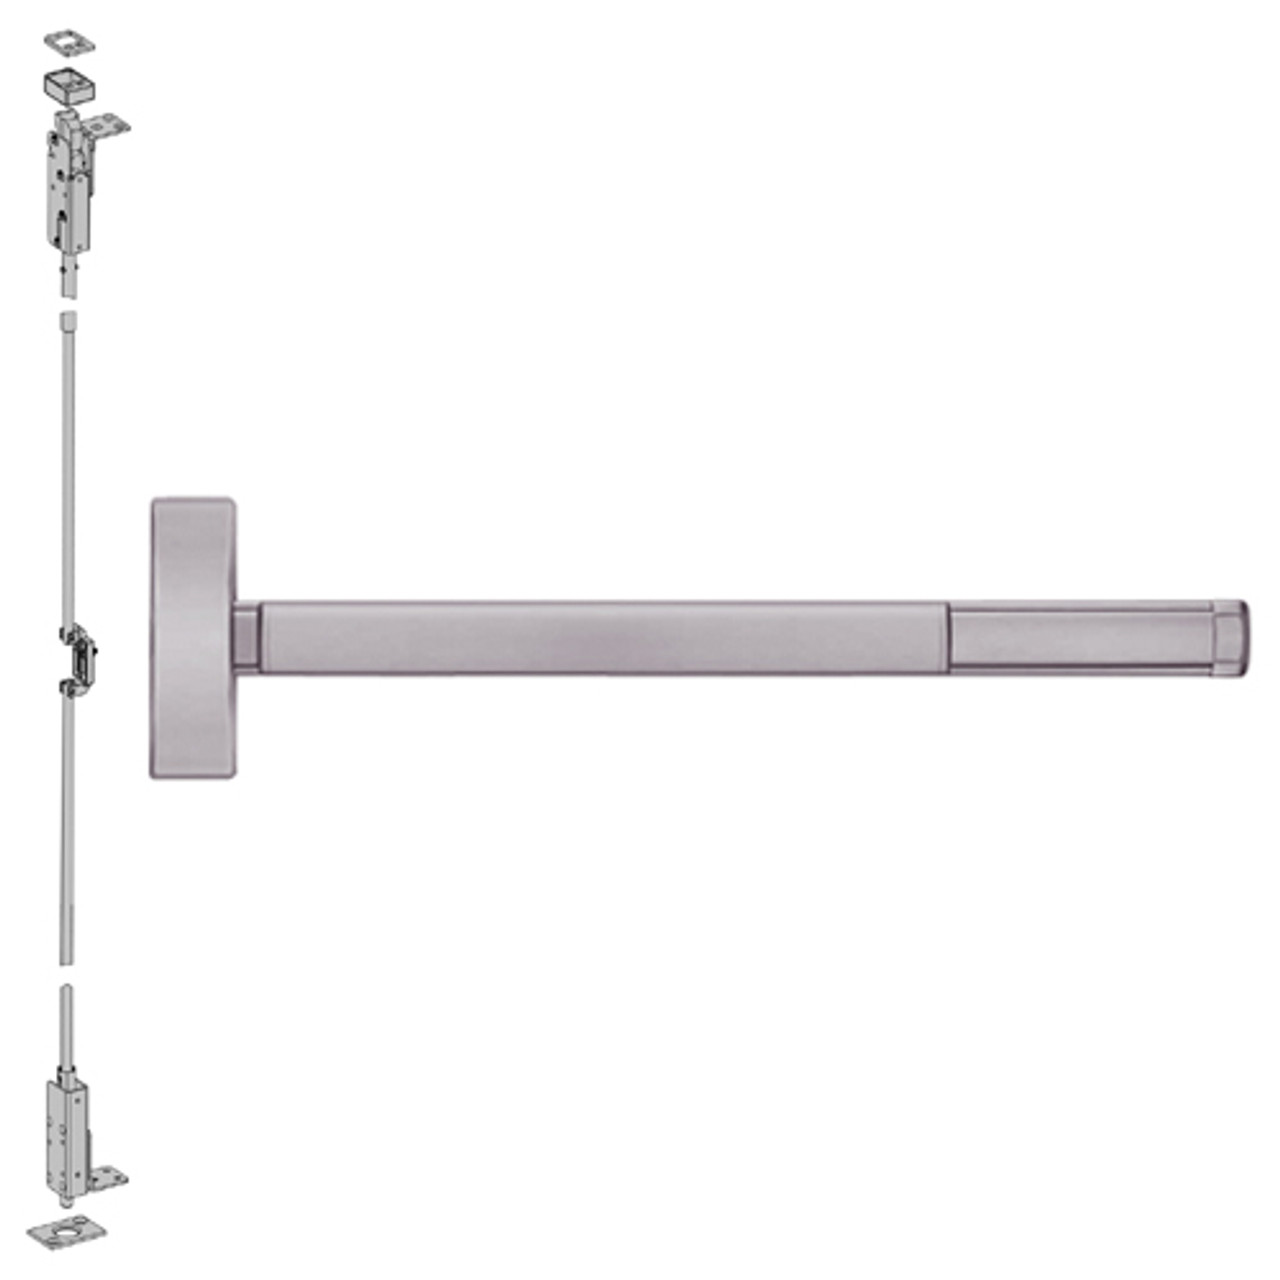 2703LBR-630-36 PHI 2700 Series Wood Door Concealed Vertical Rod Device Prepped for Key Retracts Latchbolt with Less Bottom Rod in Satin Stainless Steel Finish